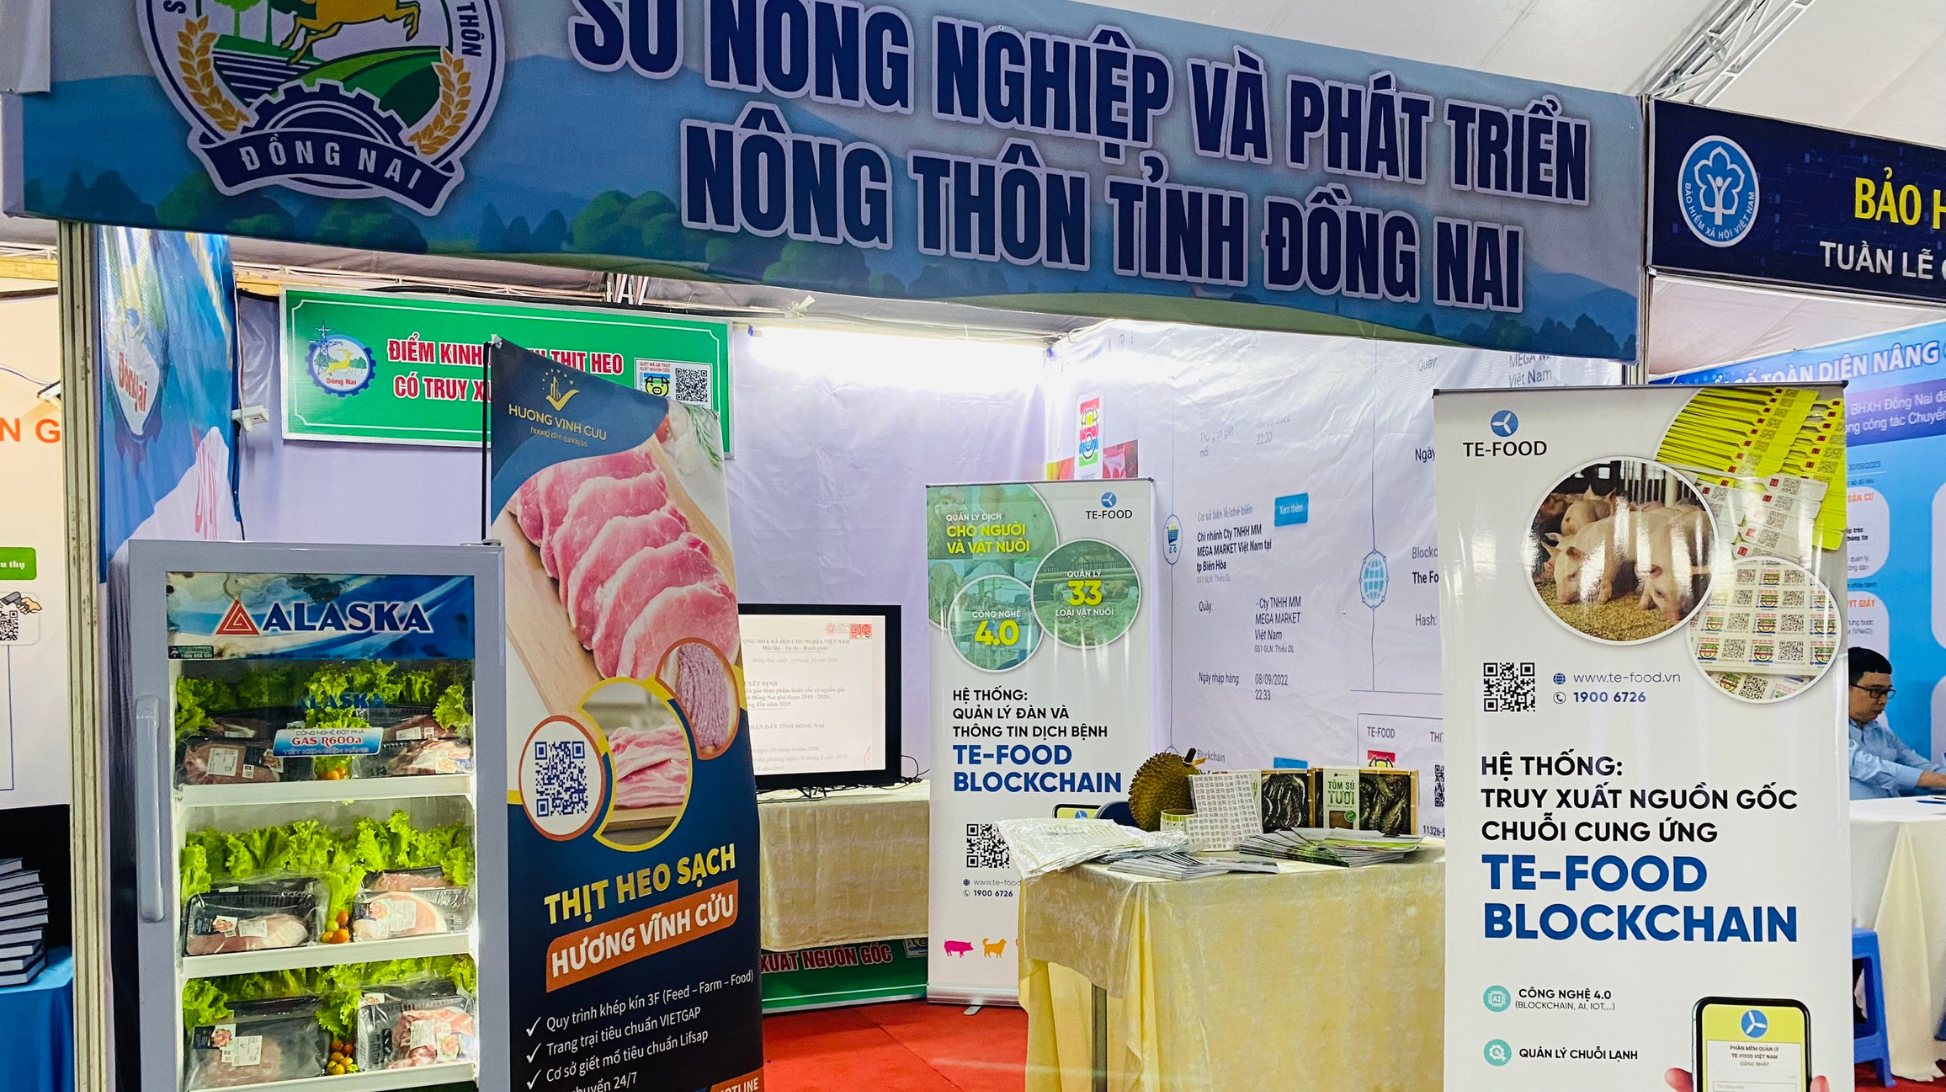 EXHIBITION “DIGITAL TRANSFORMATION WEEK DONG NAI 2023” - AN EVENT OF INTEREST